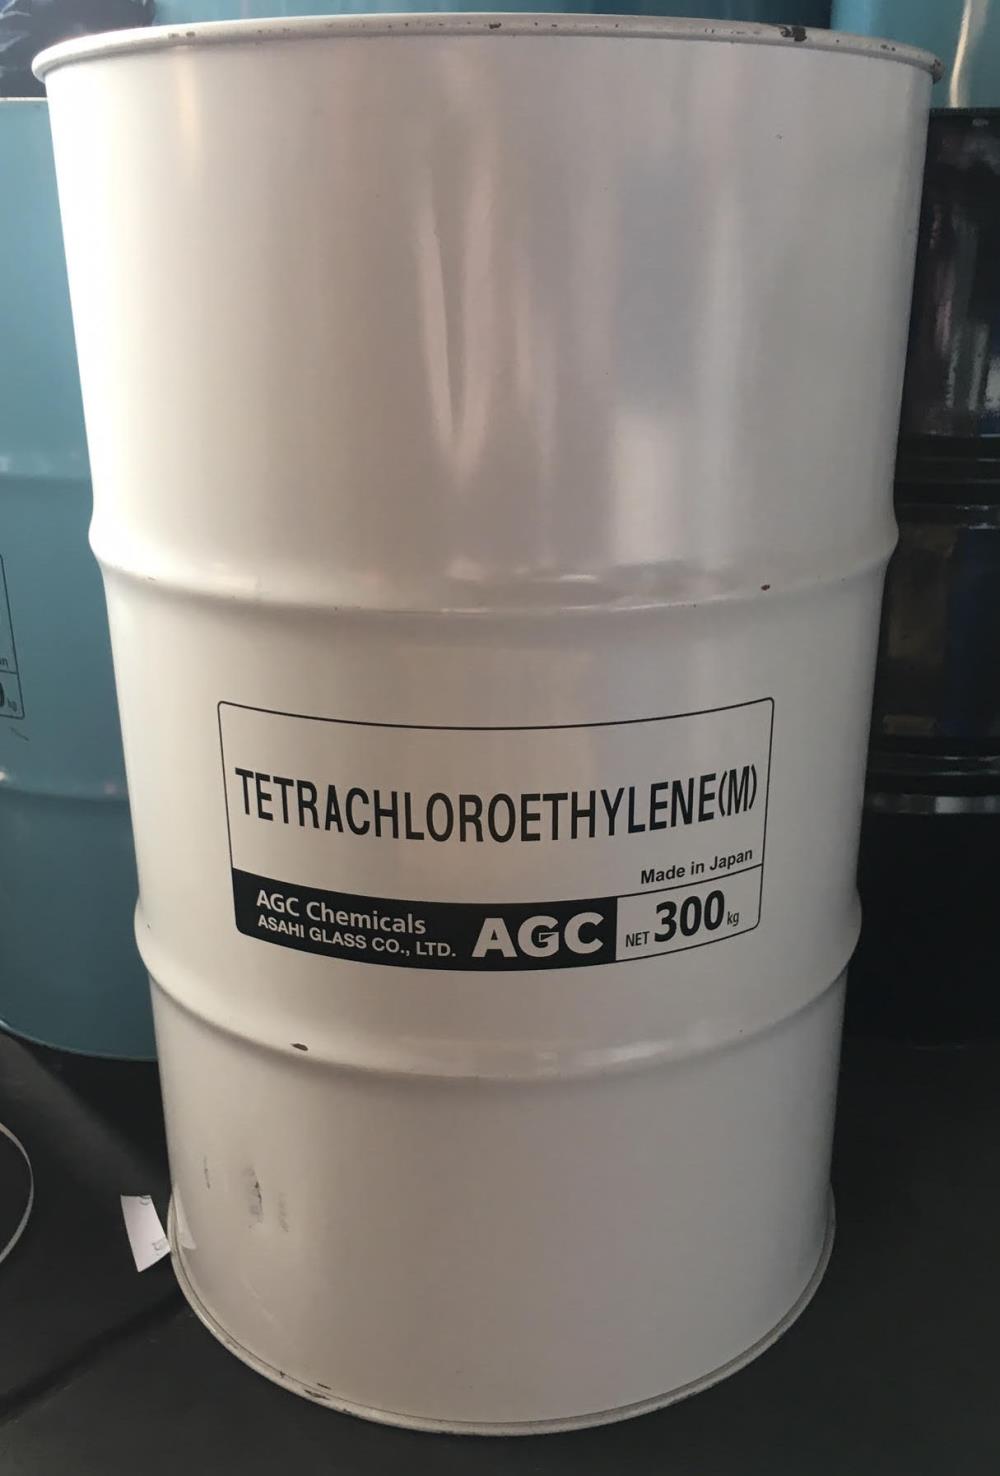 Perchloroethylene (Tetrachloroethylene),Perchloroethylene, Tetrachloroethylene, PCE, solvent,PCE,Chemicals/Removers and Solvents